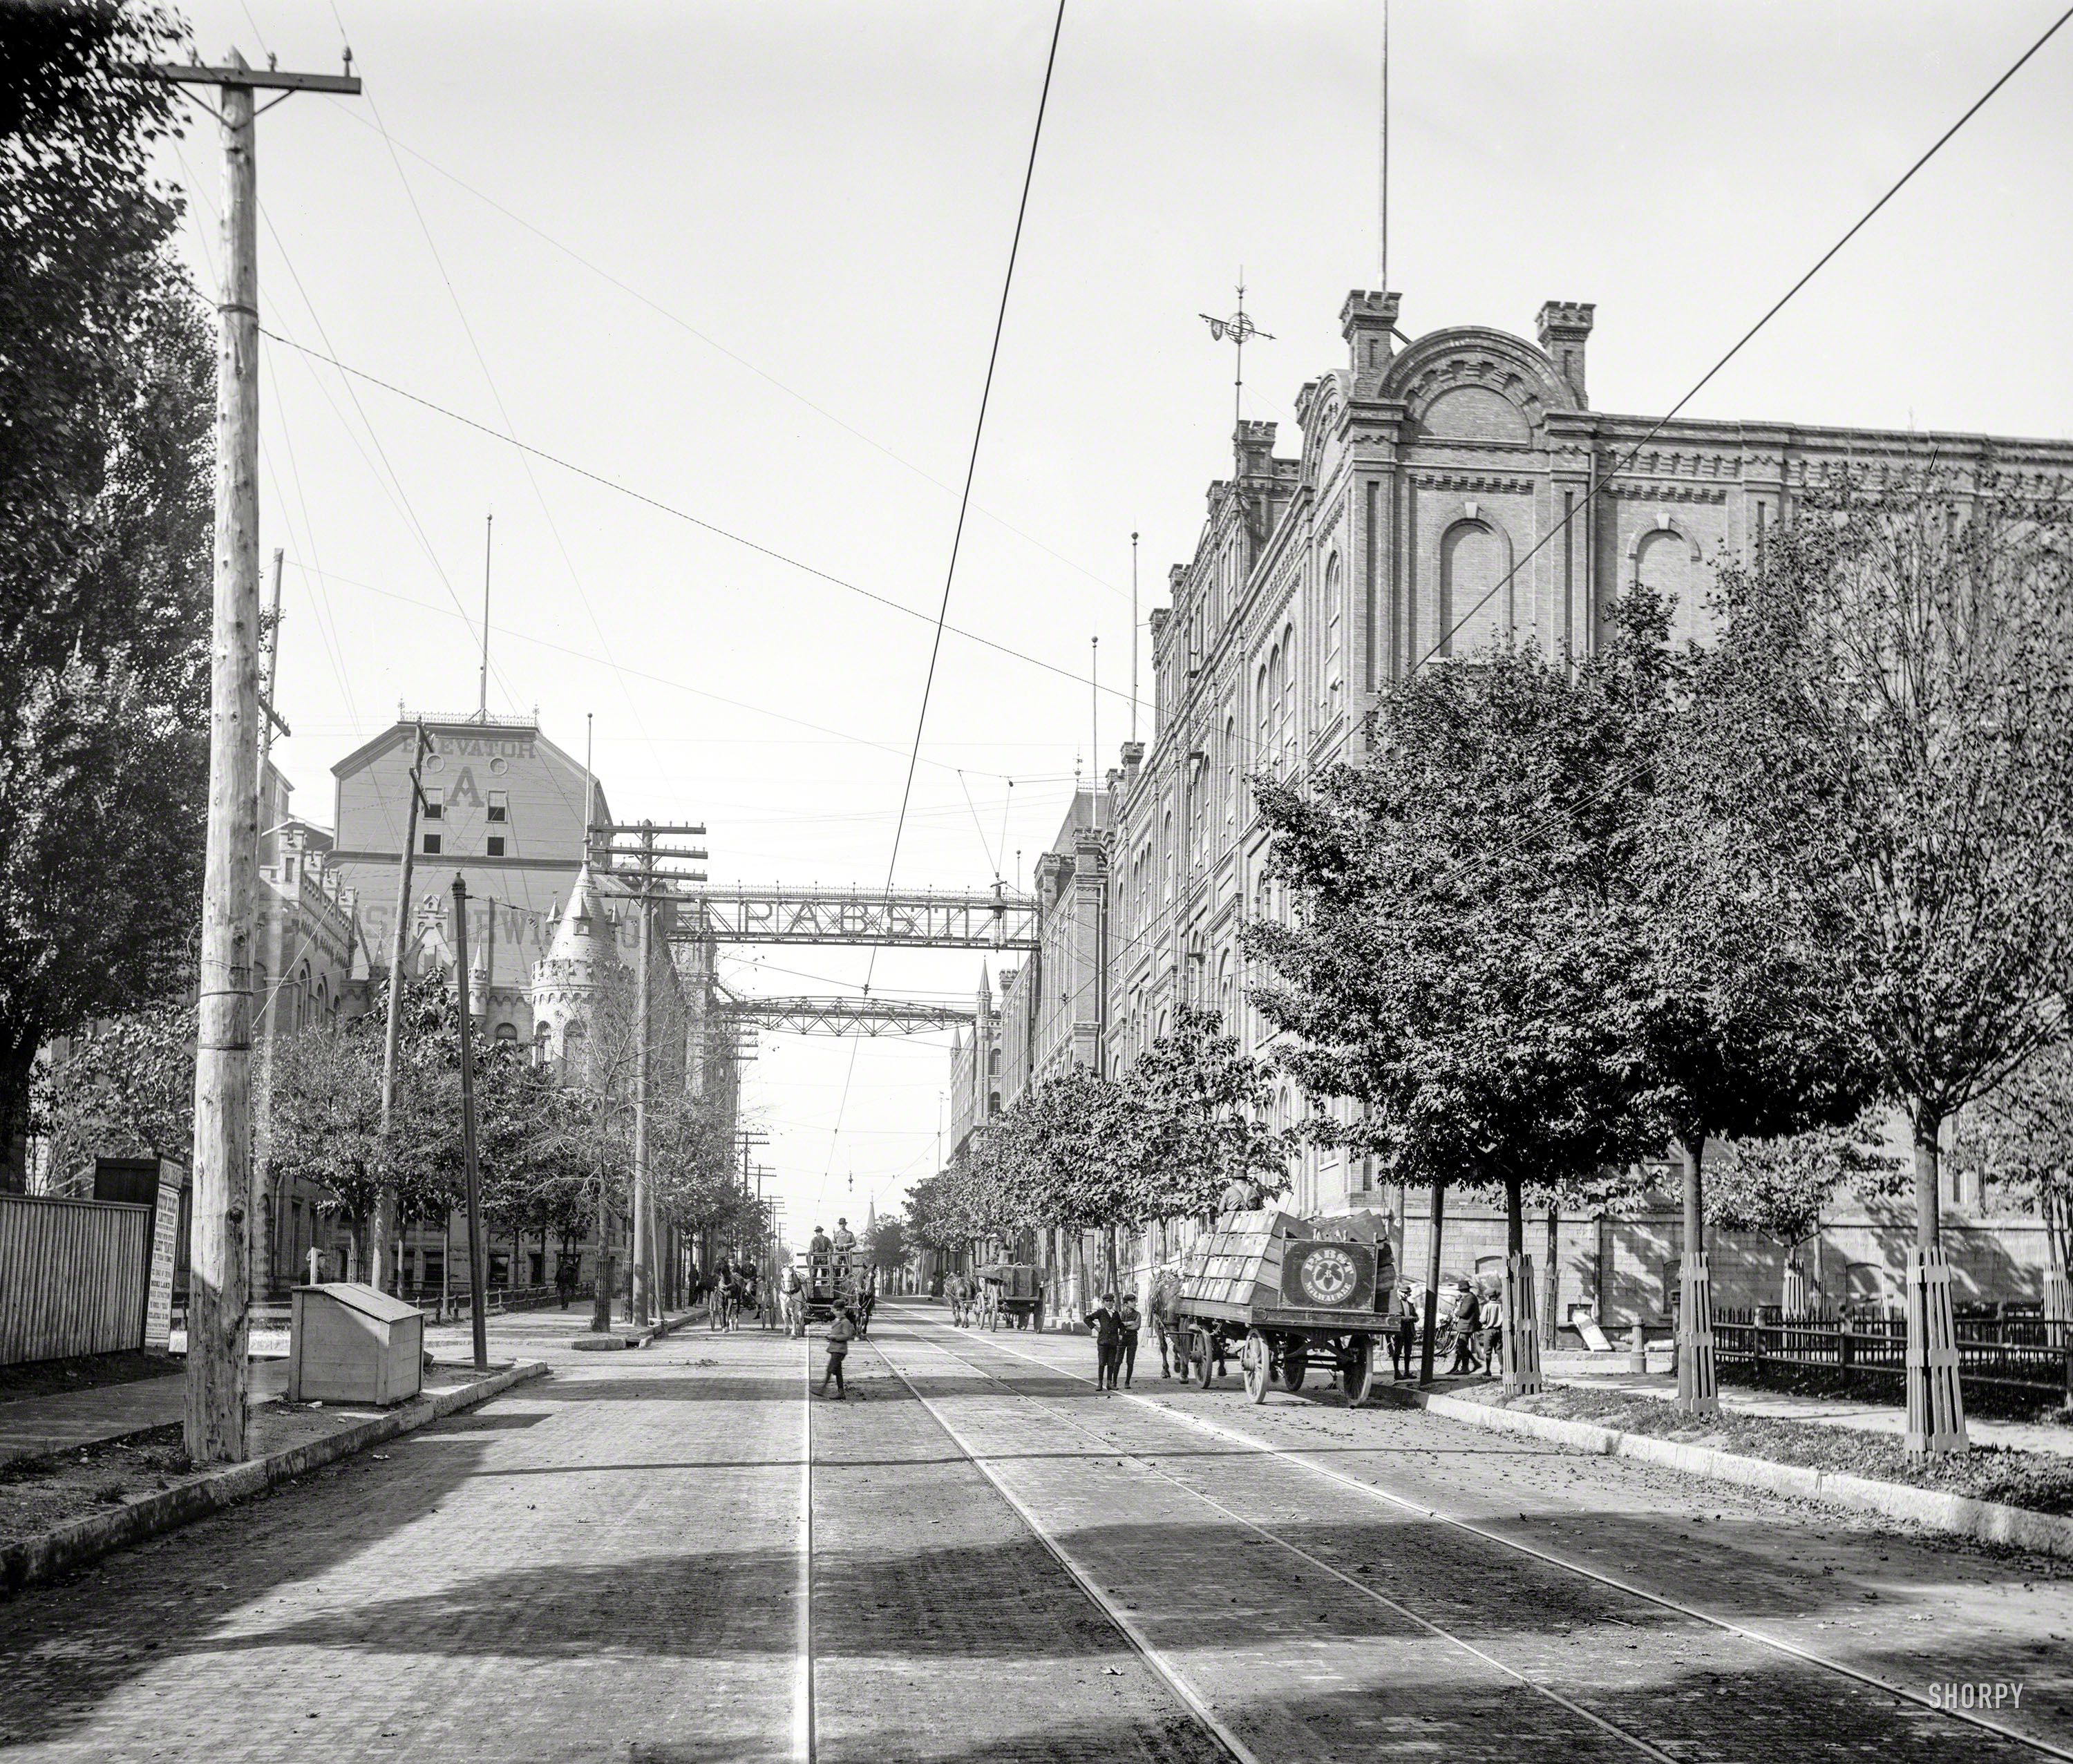 Circa 1900. "Pabst brewery, Milwaukee." Avenue of the Beer-Wagons. 8x10 inch dry plate glass negative, Detroit Publishing Company. View full size.